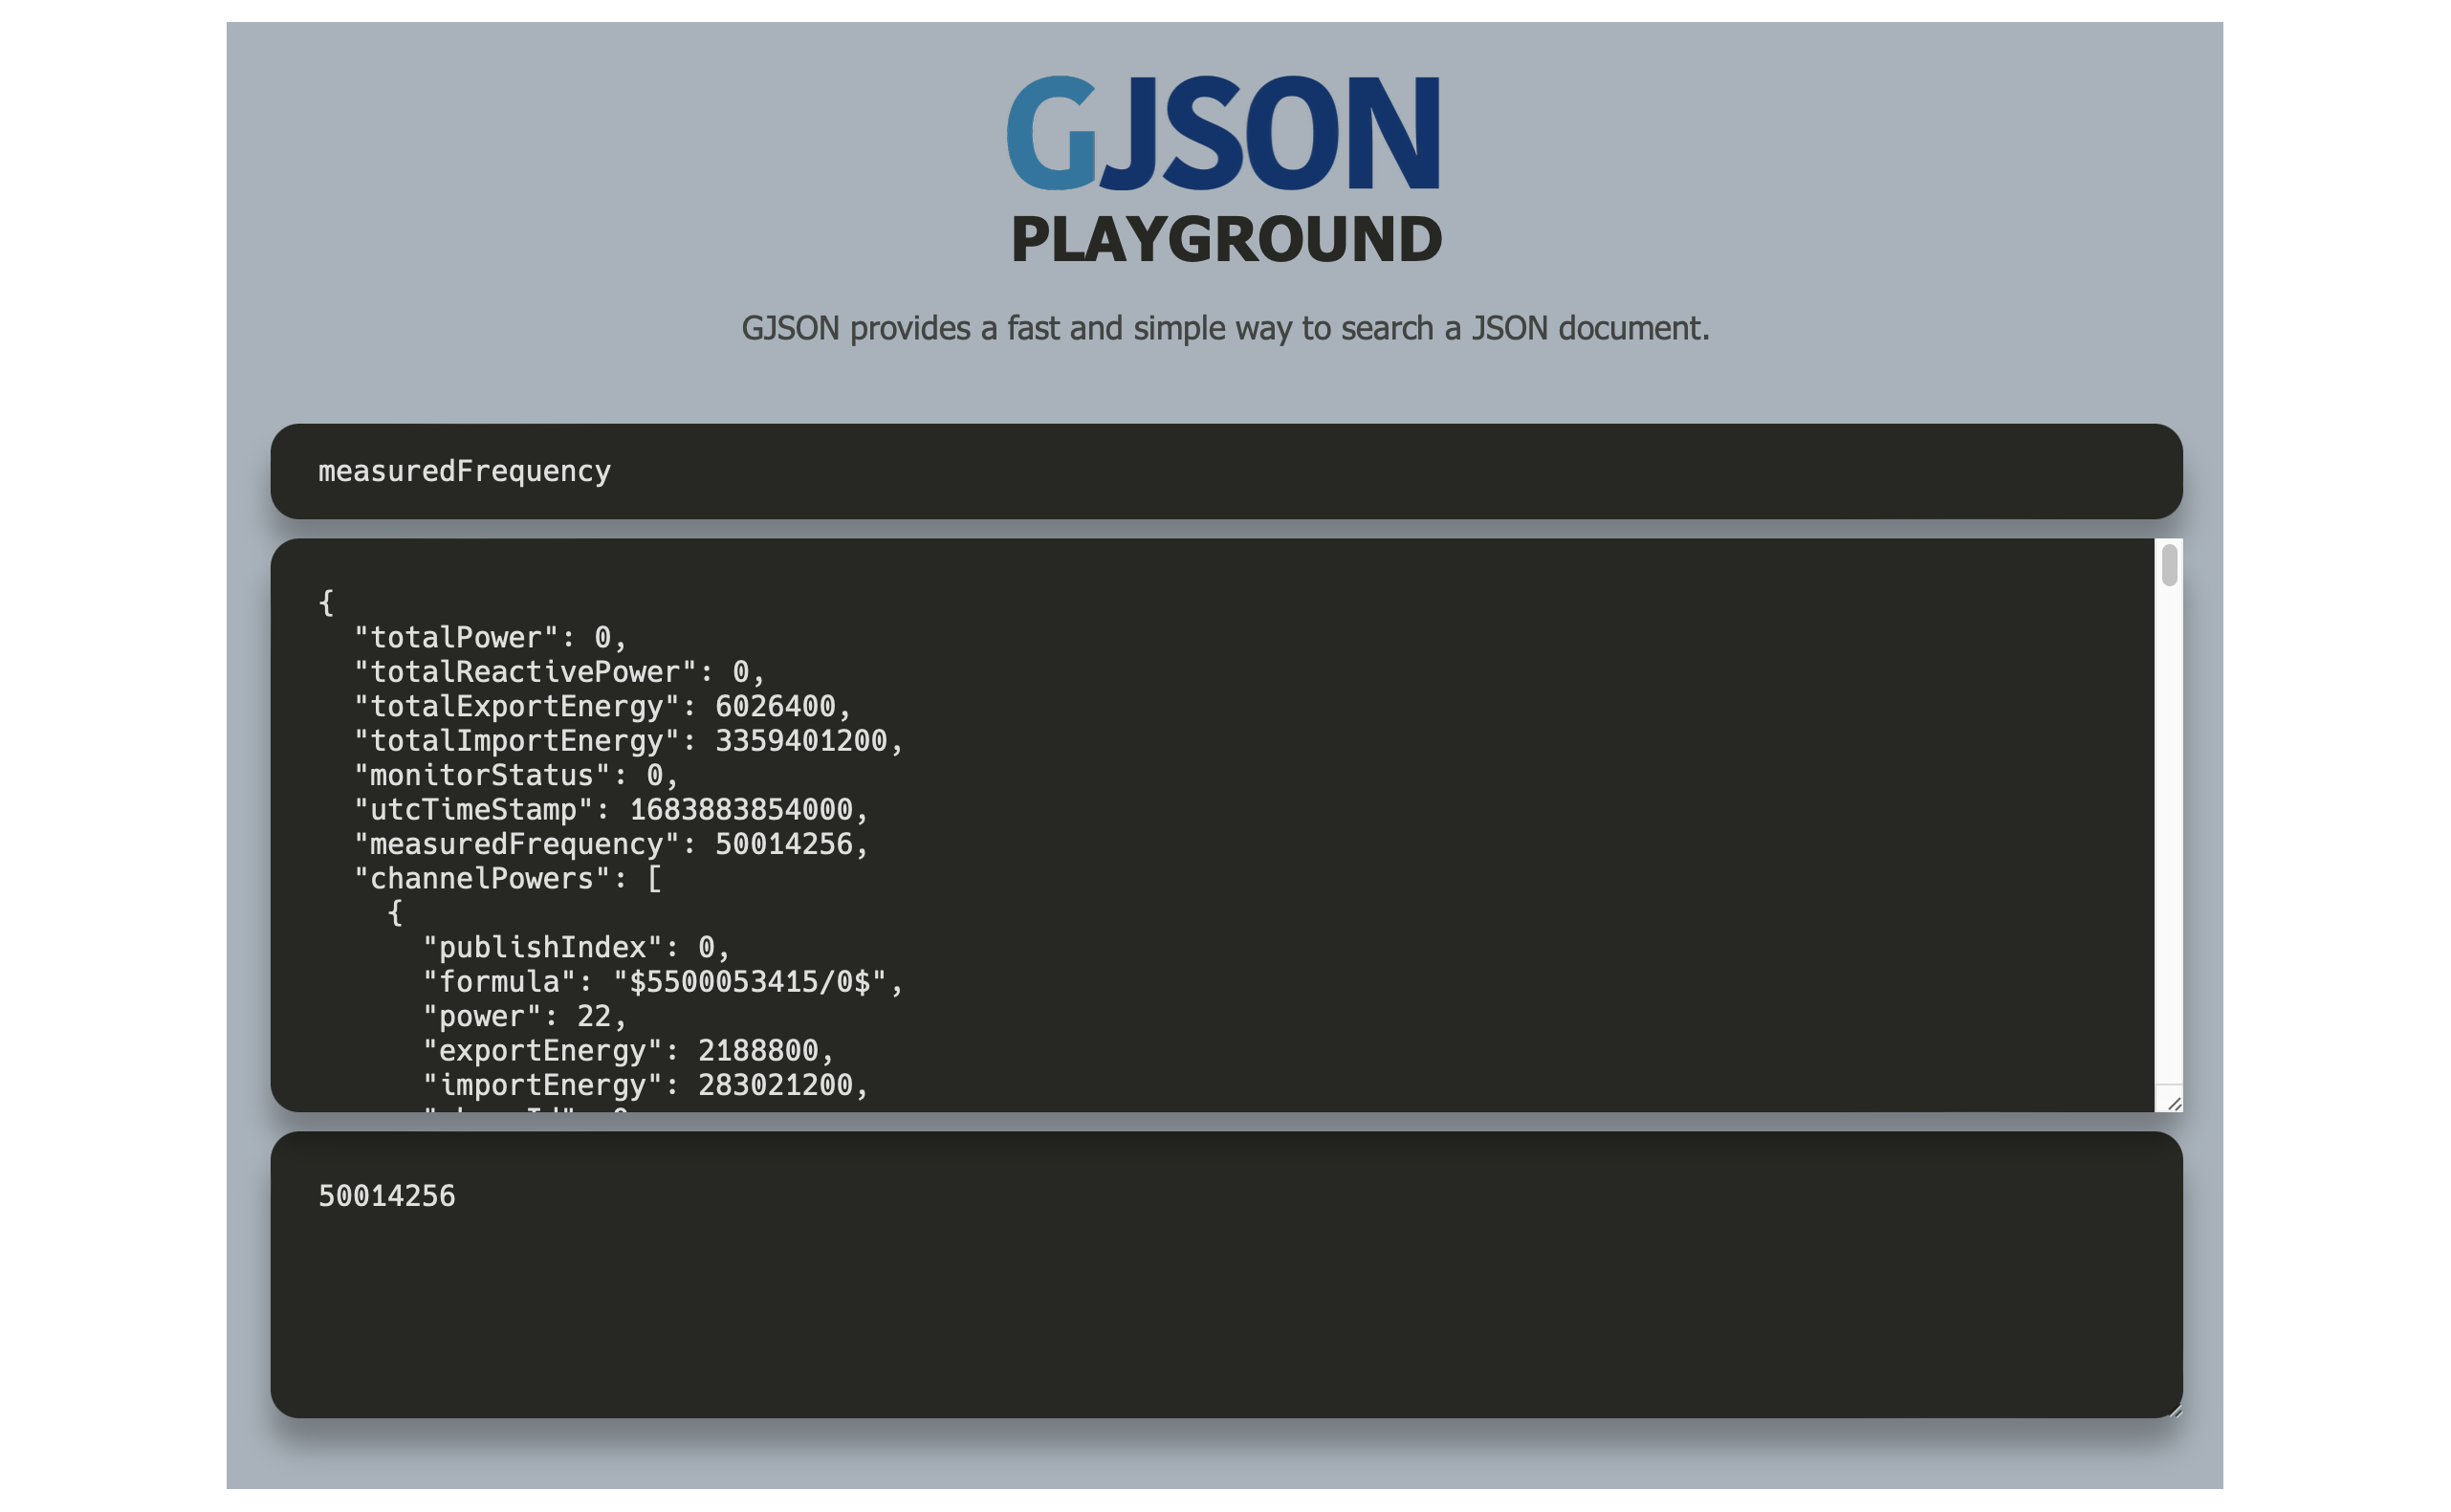 GJSON - Extracting power for channel 0 on CT Hub 5500053415